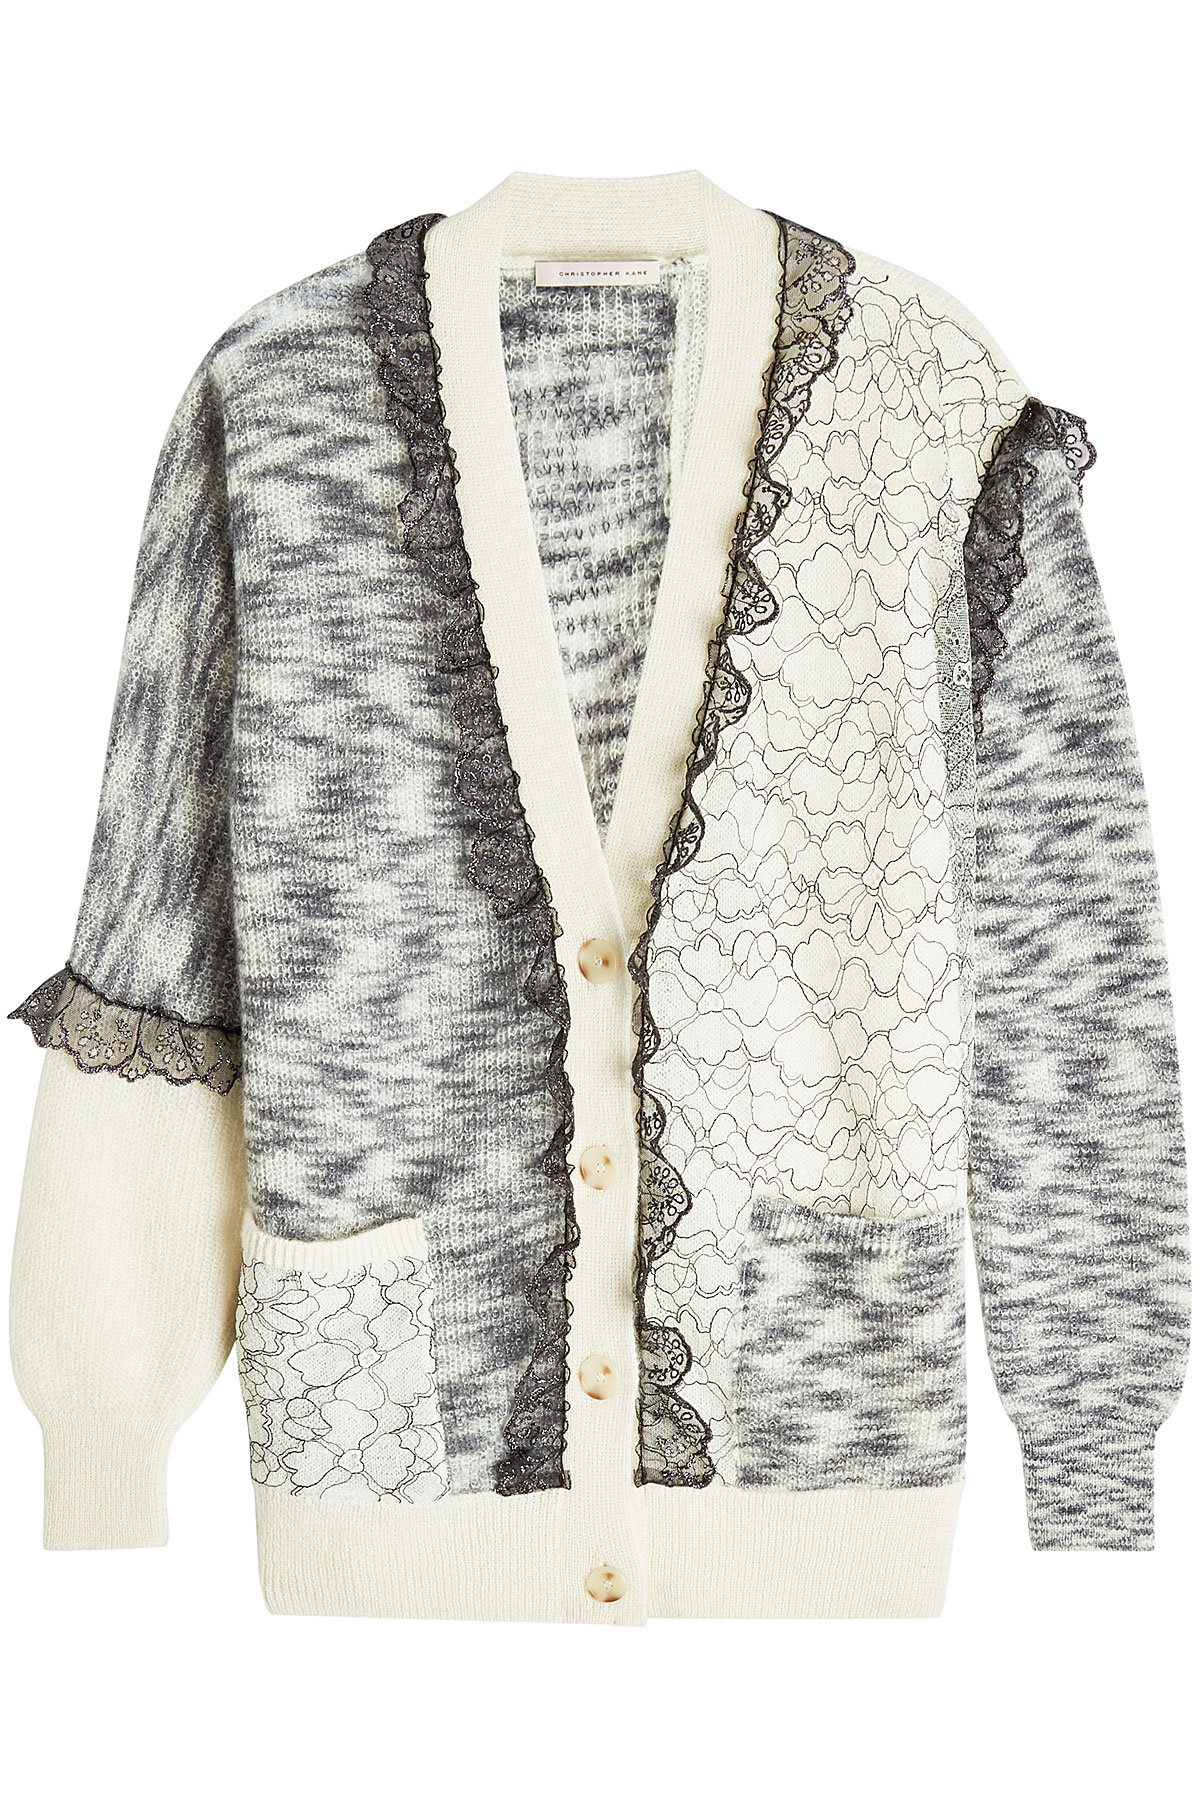 Patchwork Cardigan with Mohair, Wool and Lace by Christopher Kane